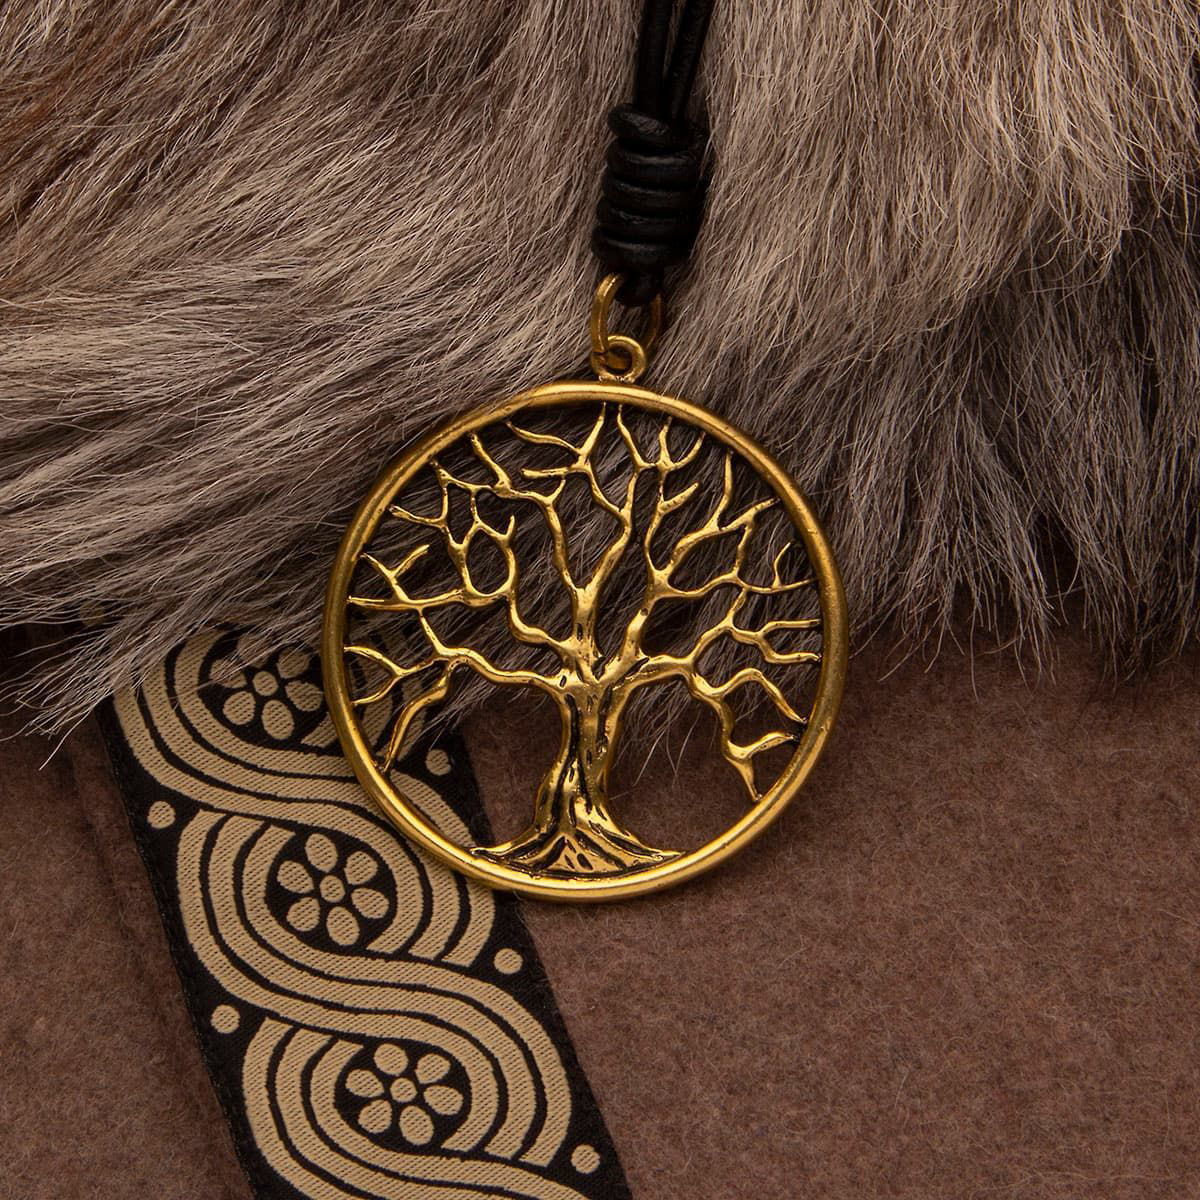 gold finish Tree of Life pendant is 2-1/4" in diameter and hangs from a 36" long black cord with a clasp